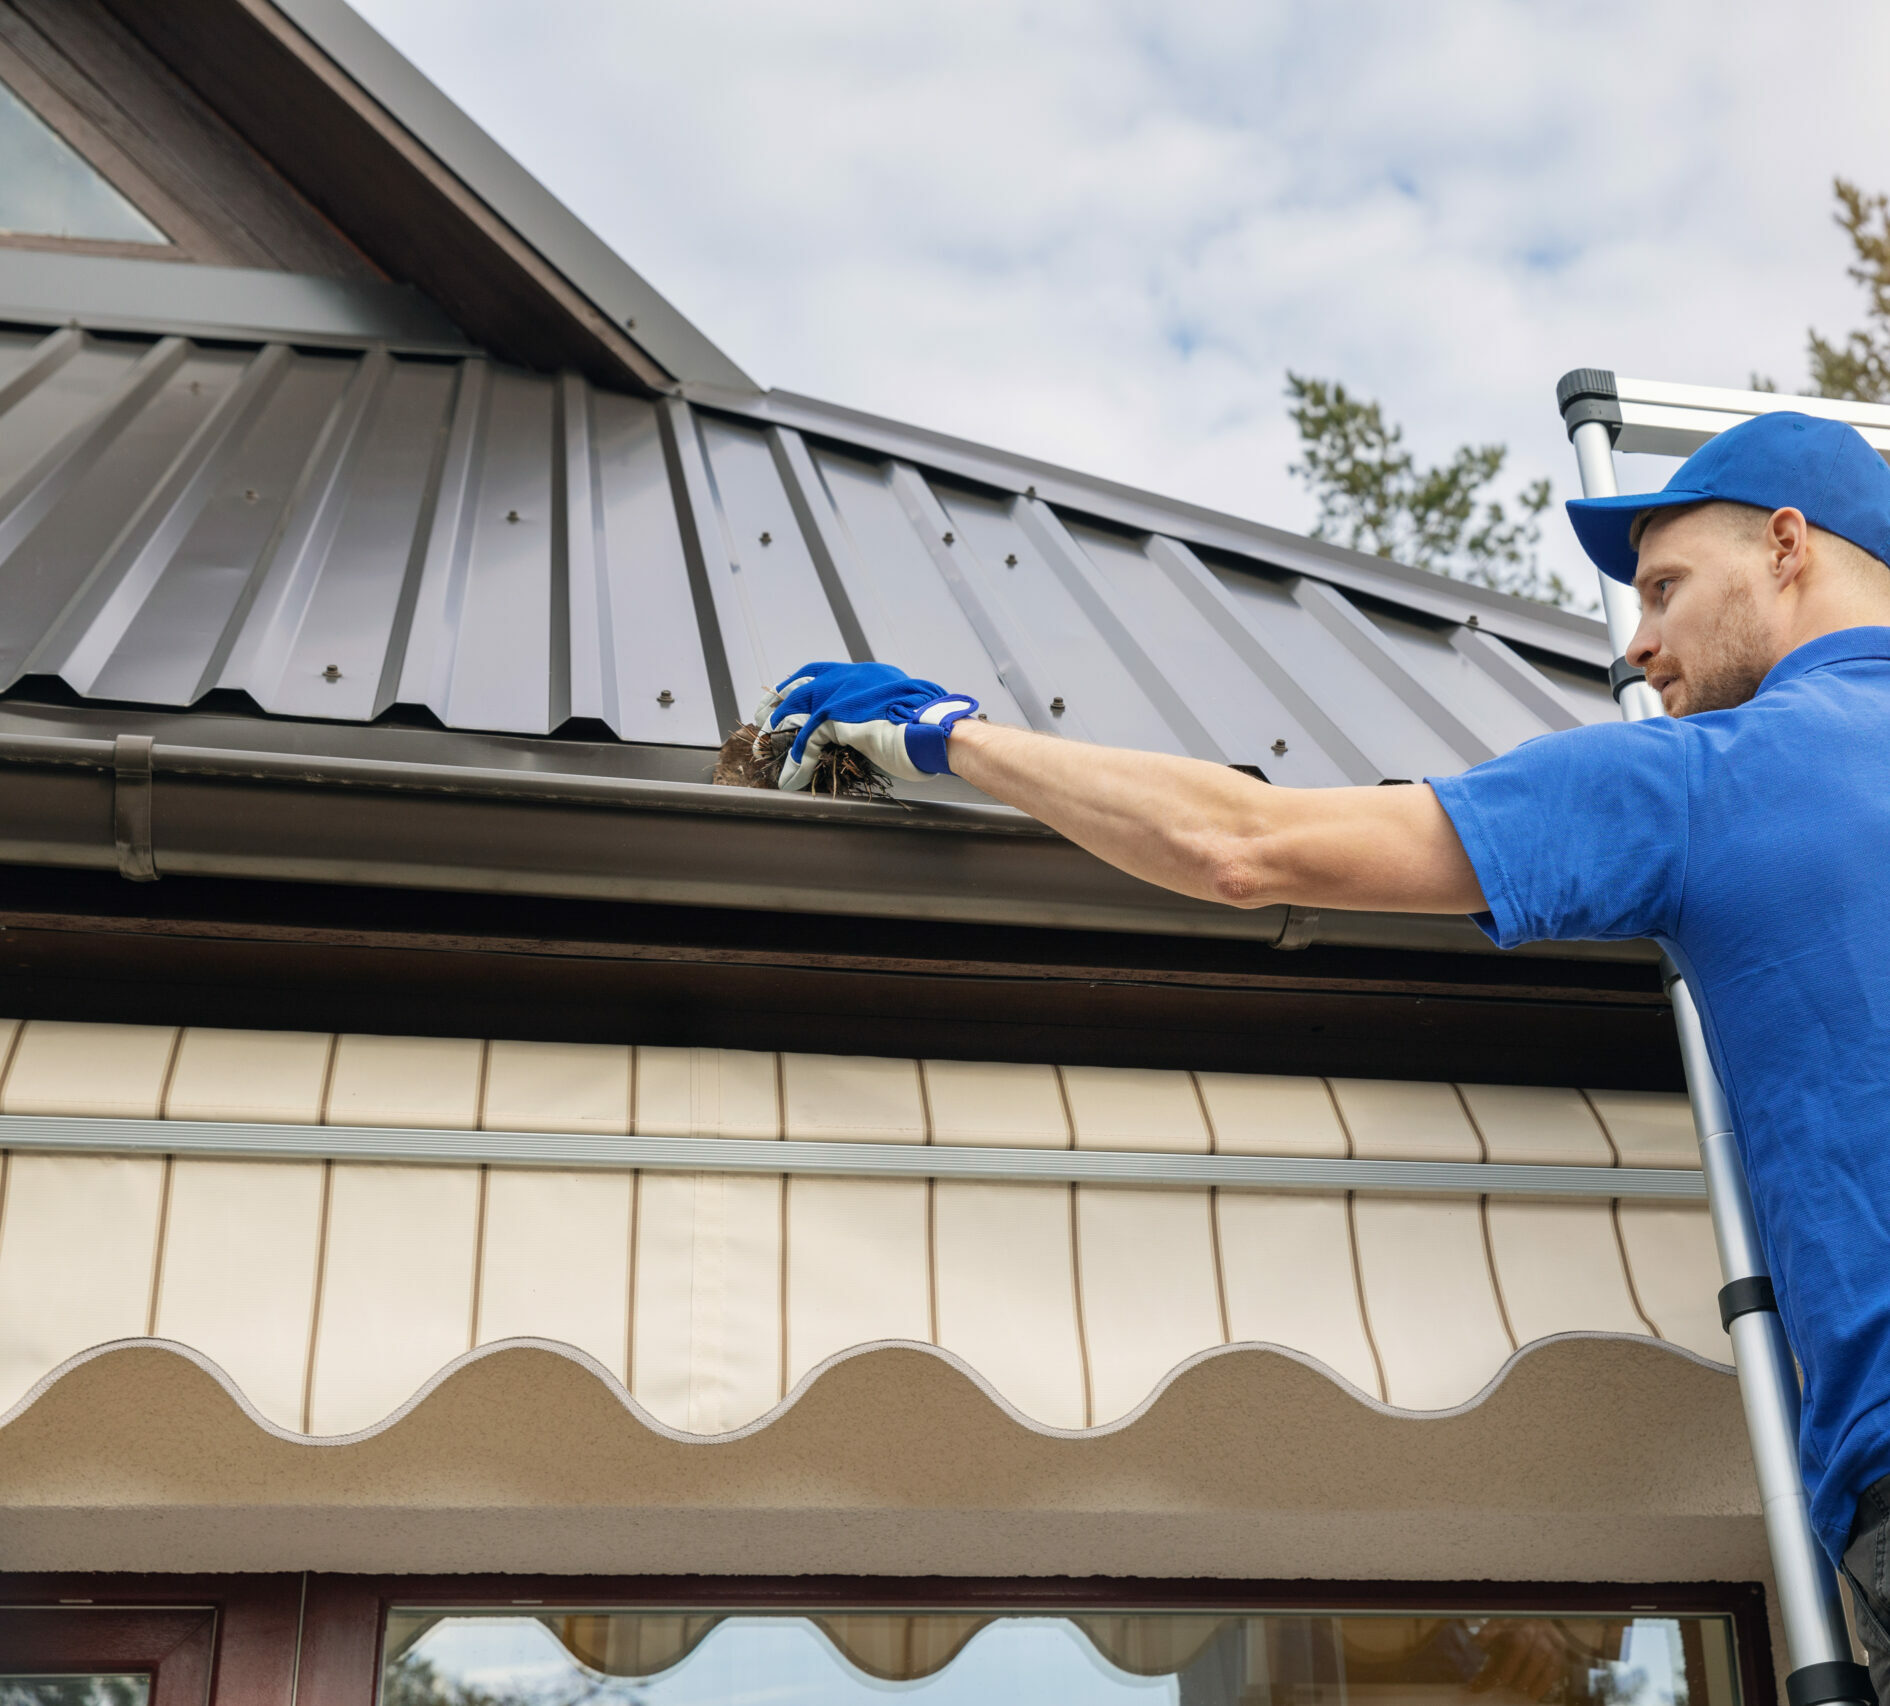 Discover effective Commercial Gutter Maintenance Techniques to protect your property. Dive into our expert guide today!